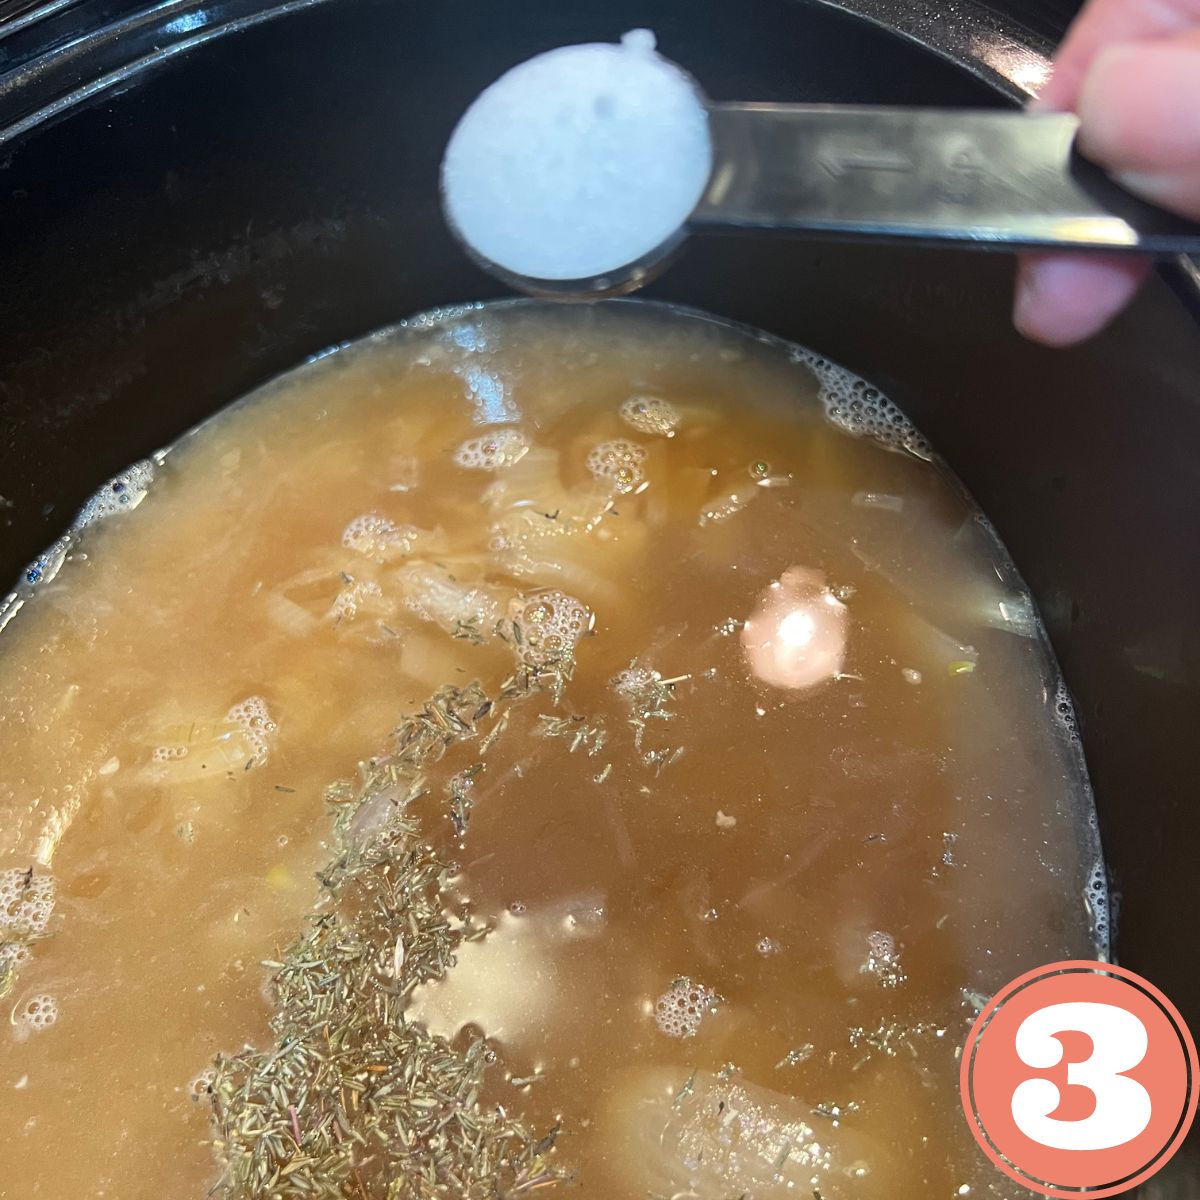 Adding a teaspoon of sugar to a crockpot with onion soup in it